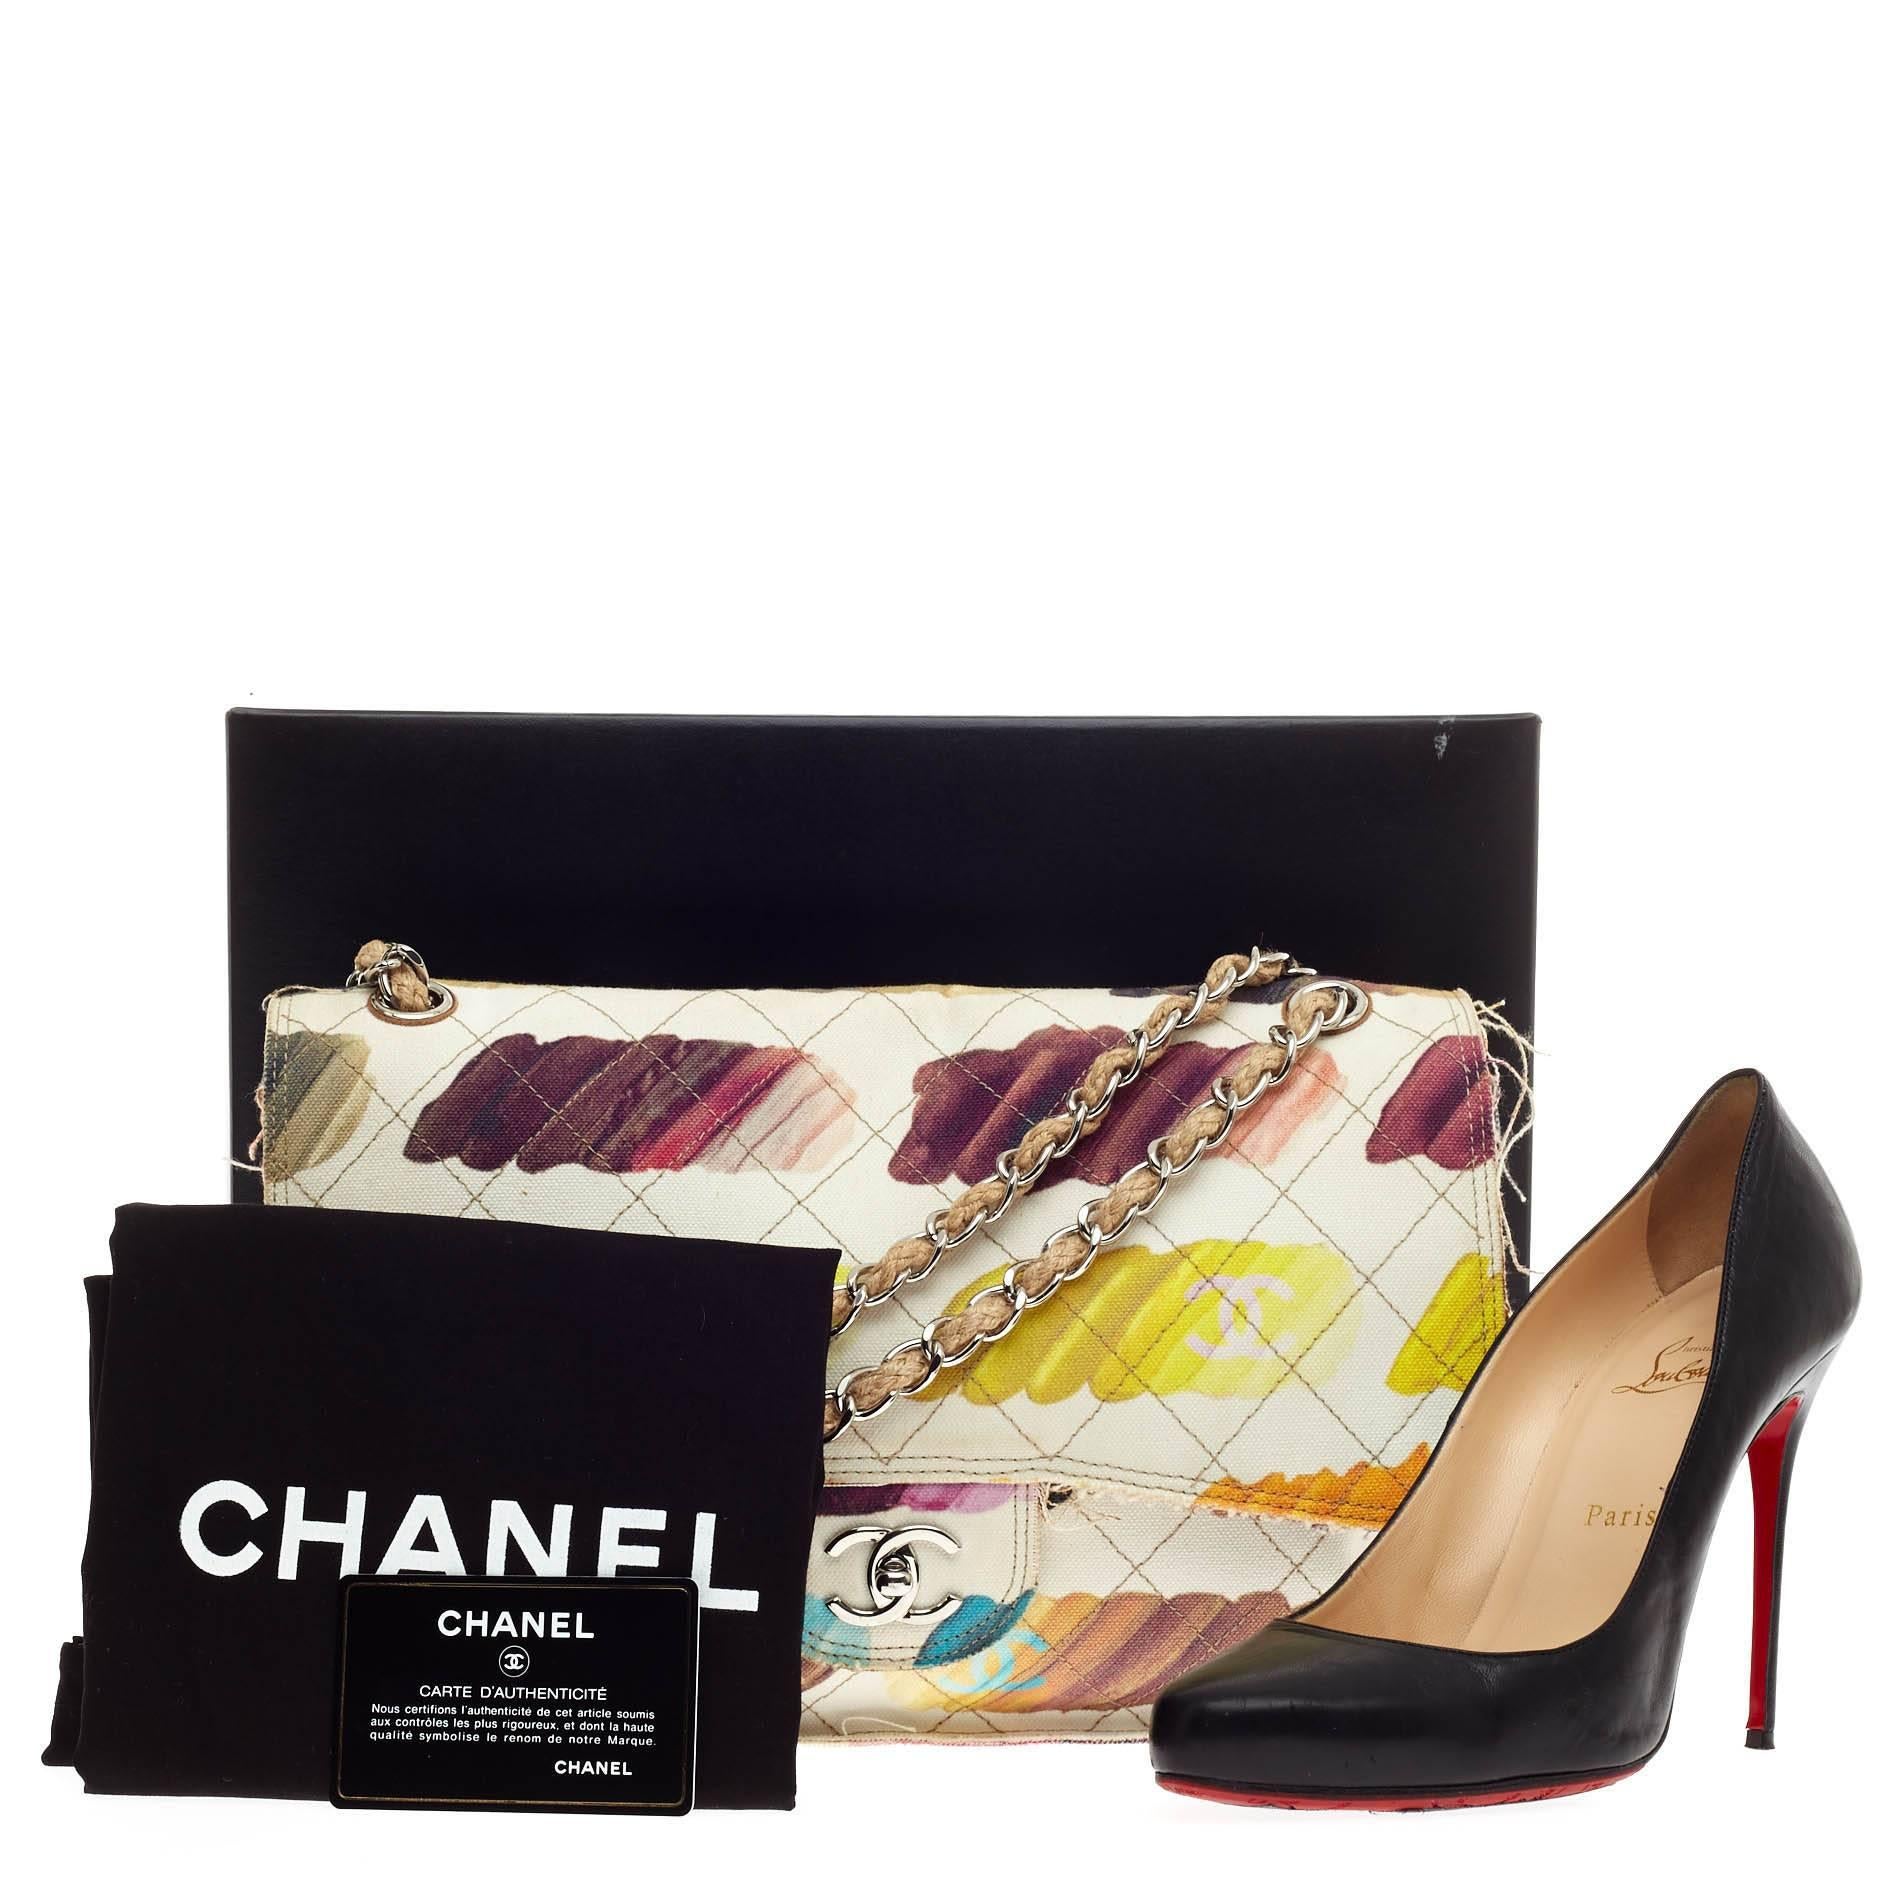 This authentic Chanel Colorama Flap Watercolor Canvas Jumbo, featured in Chanel's Spring/Summer 2014 Act 2 runway collection, mixes traditional styling with avant-garde artistic flair. This modern, fresh flap bag features hand-painted colorful,